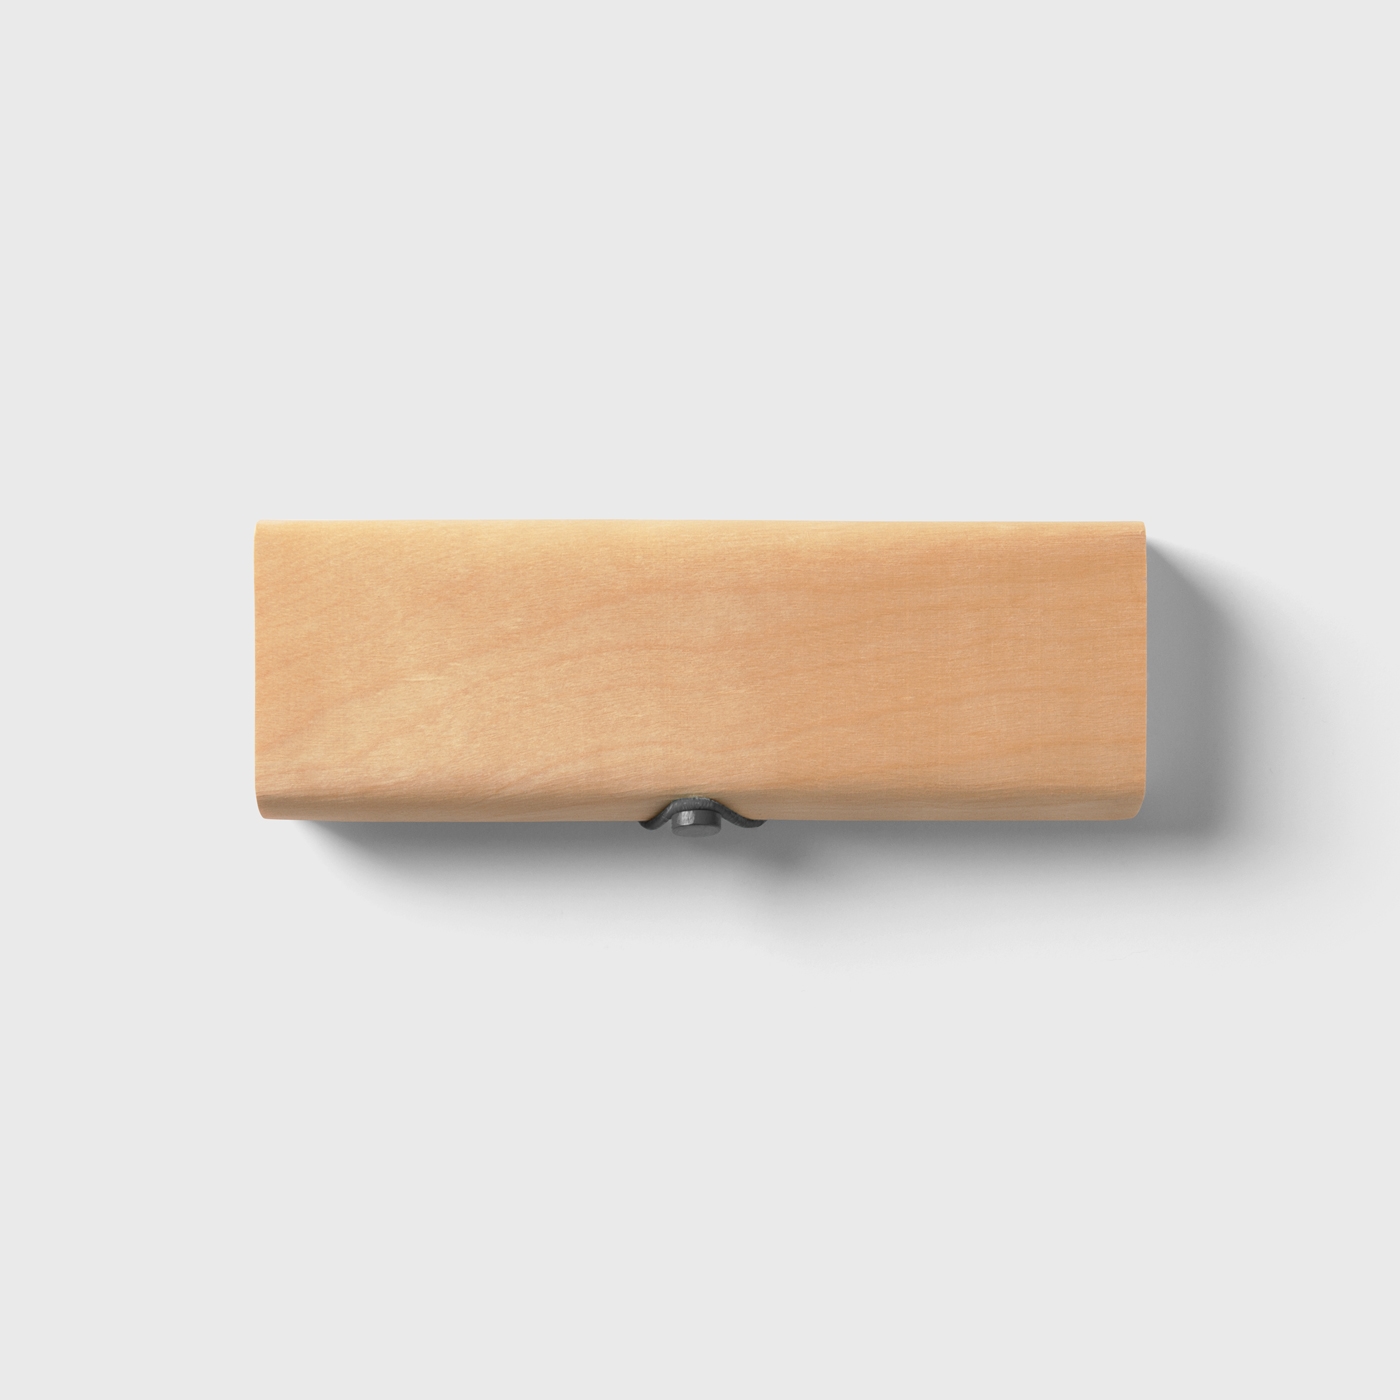 Top View of Oblong Wooden Box Mockup FREE PSD